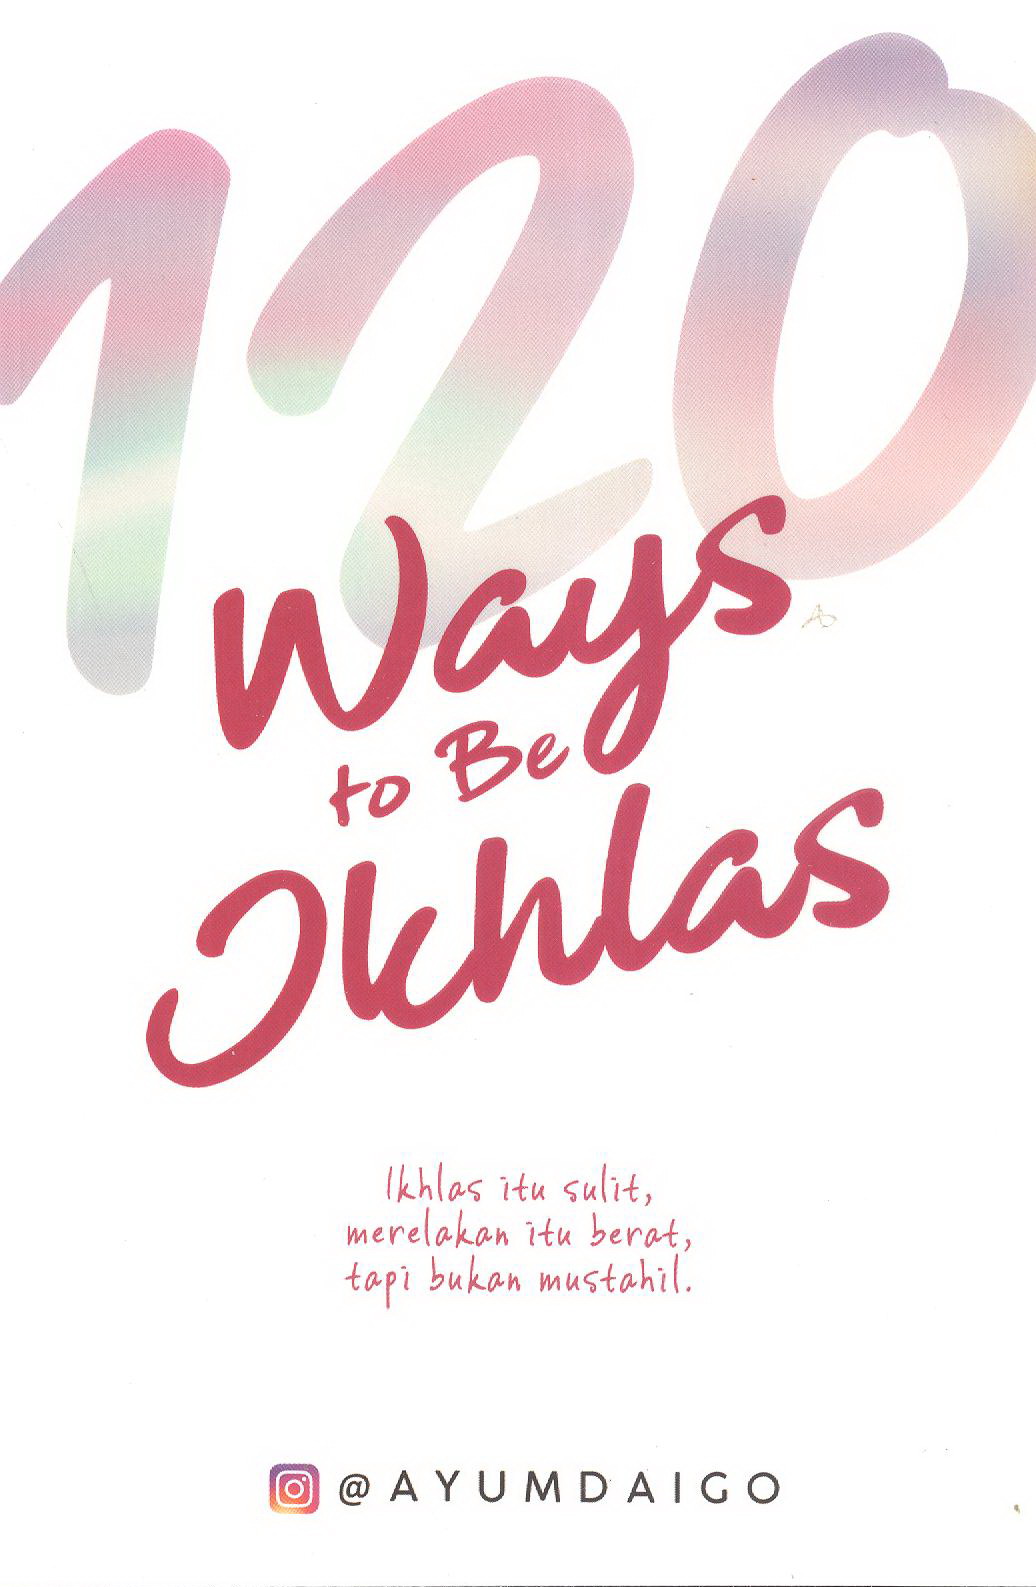 120 Ways to be Ikhlas